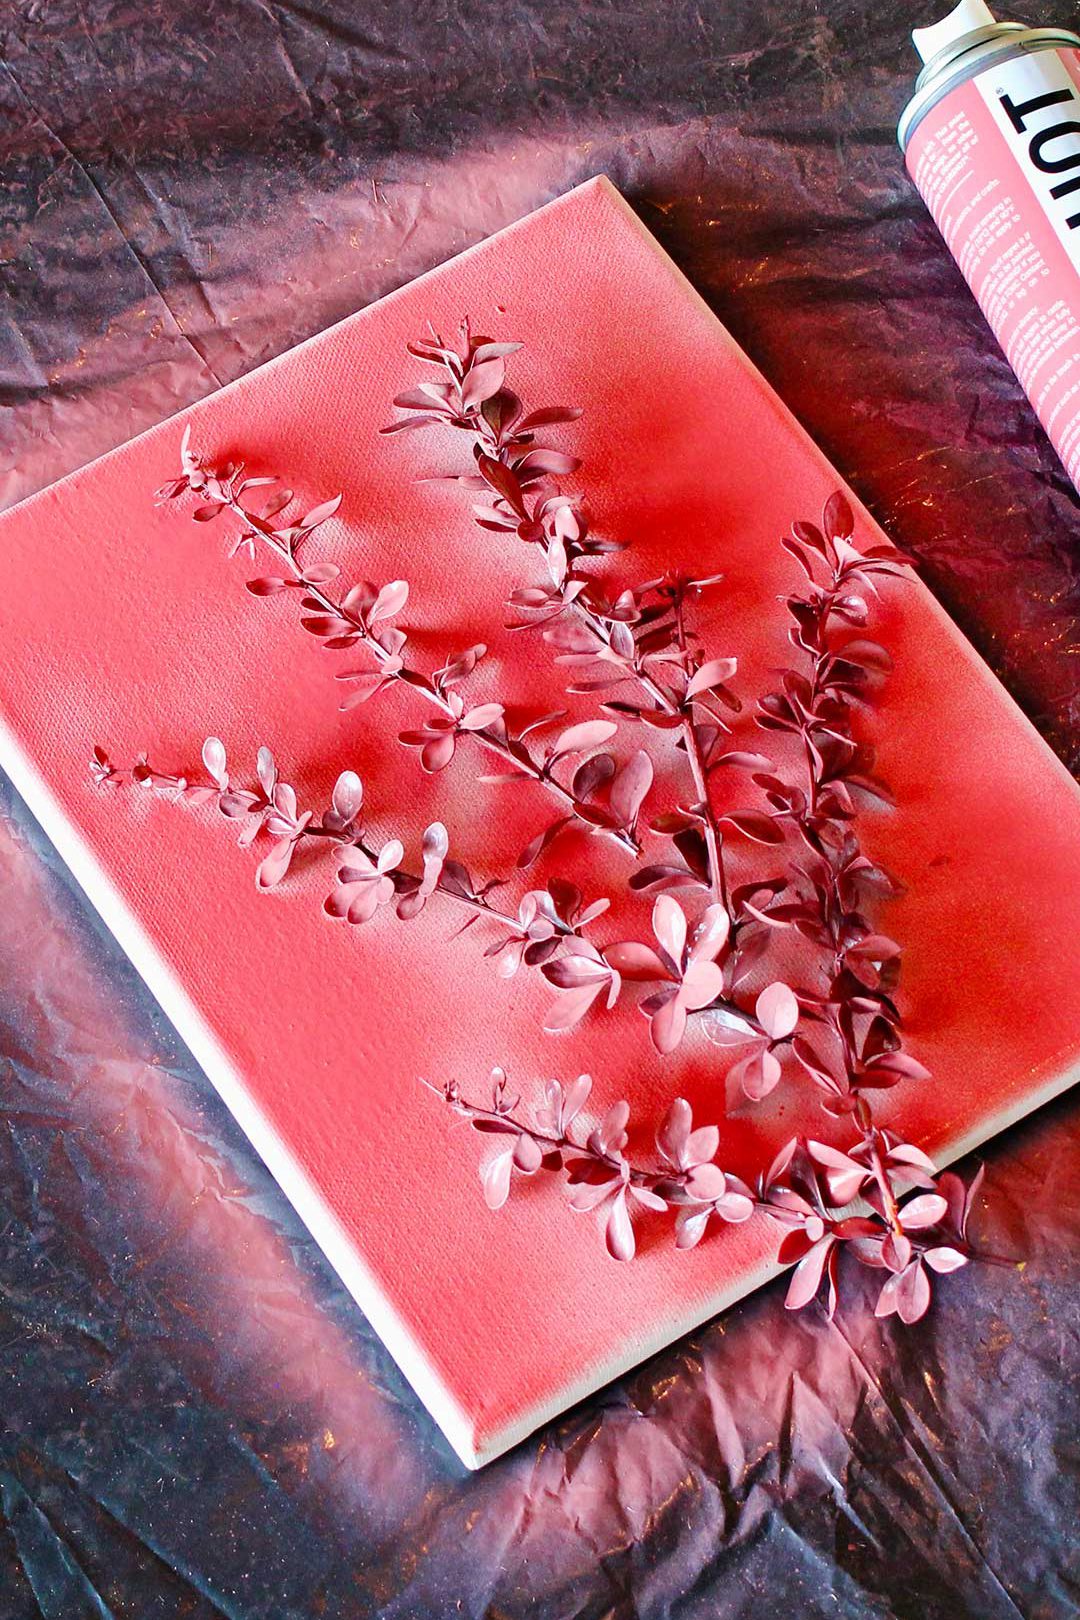 Branches with small leaves on white canvas after painting red.